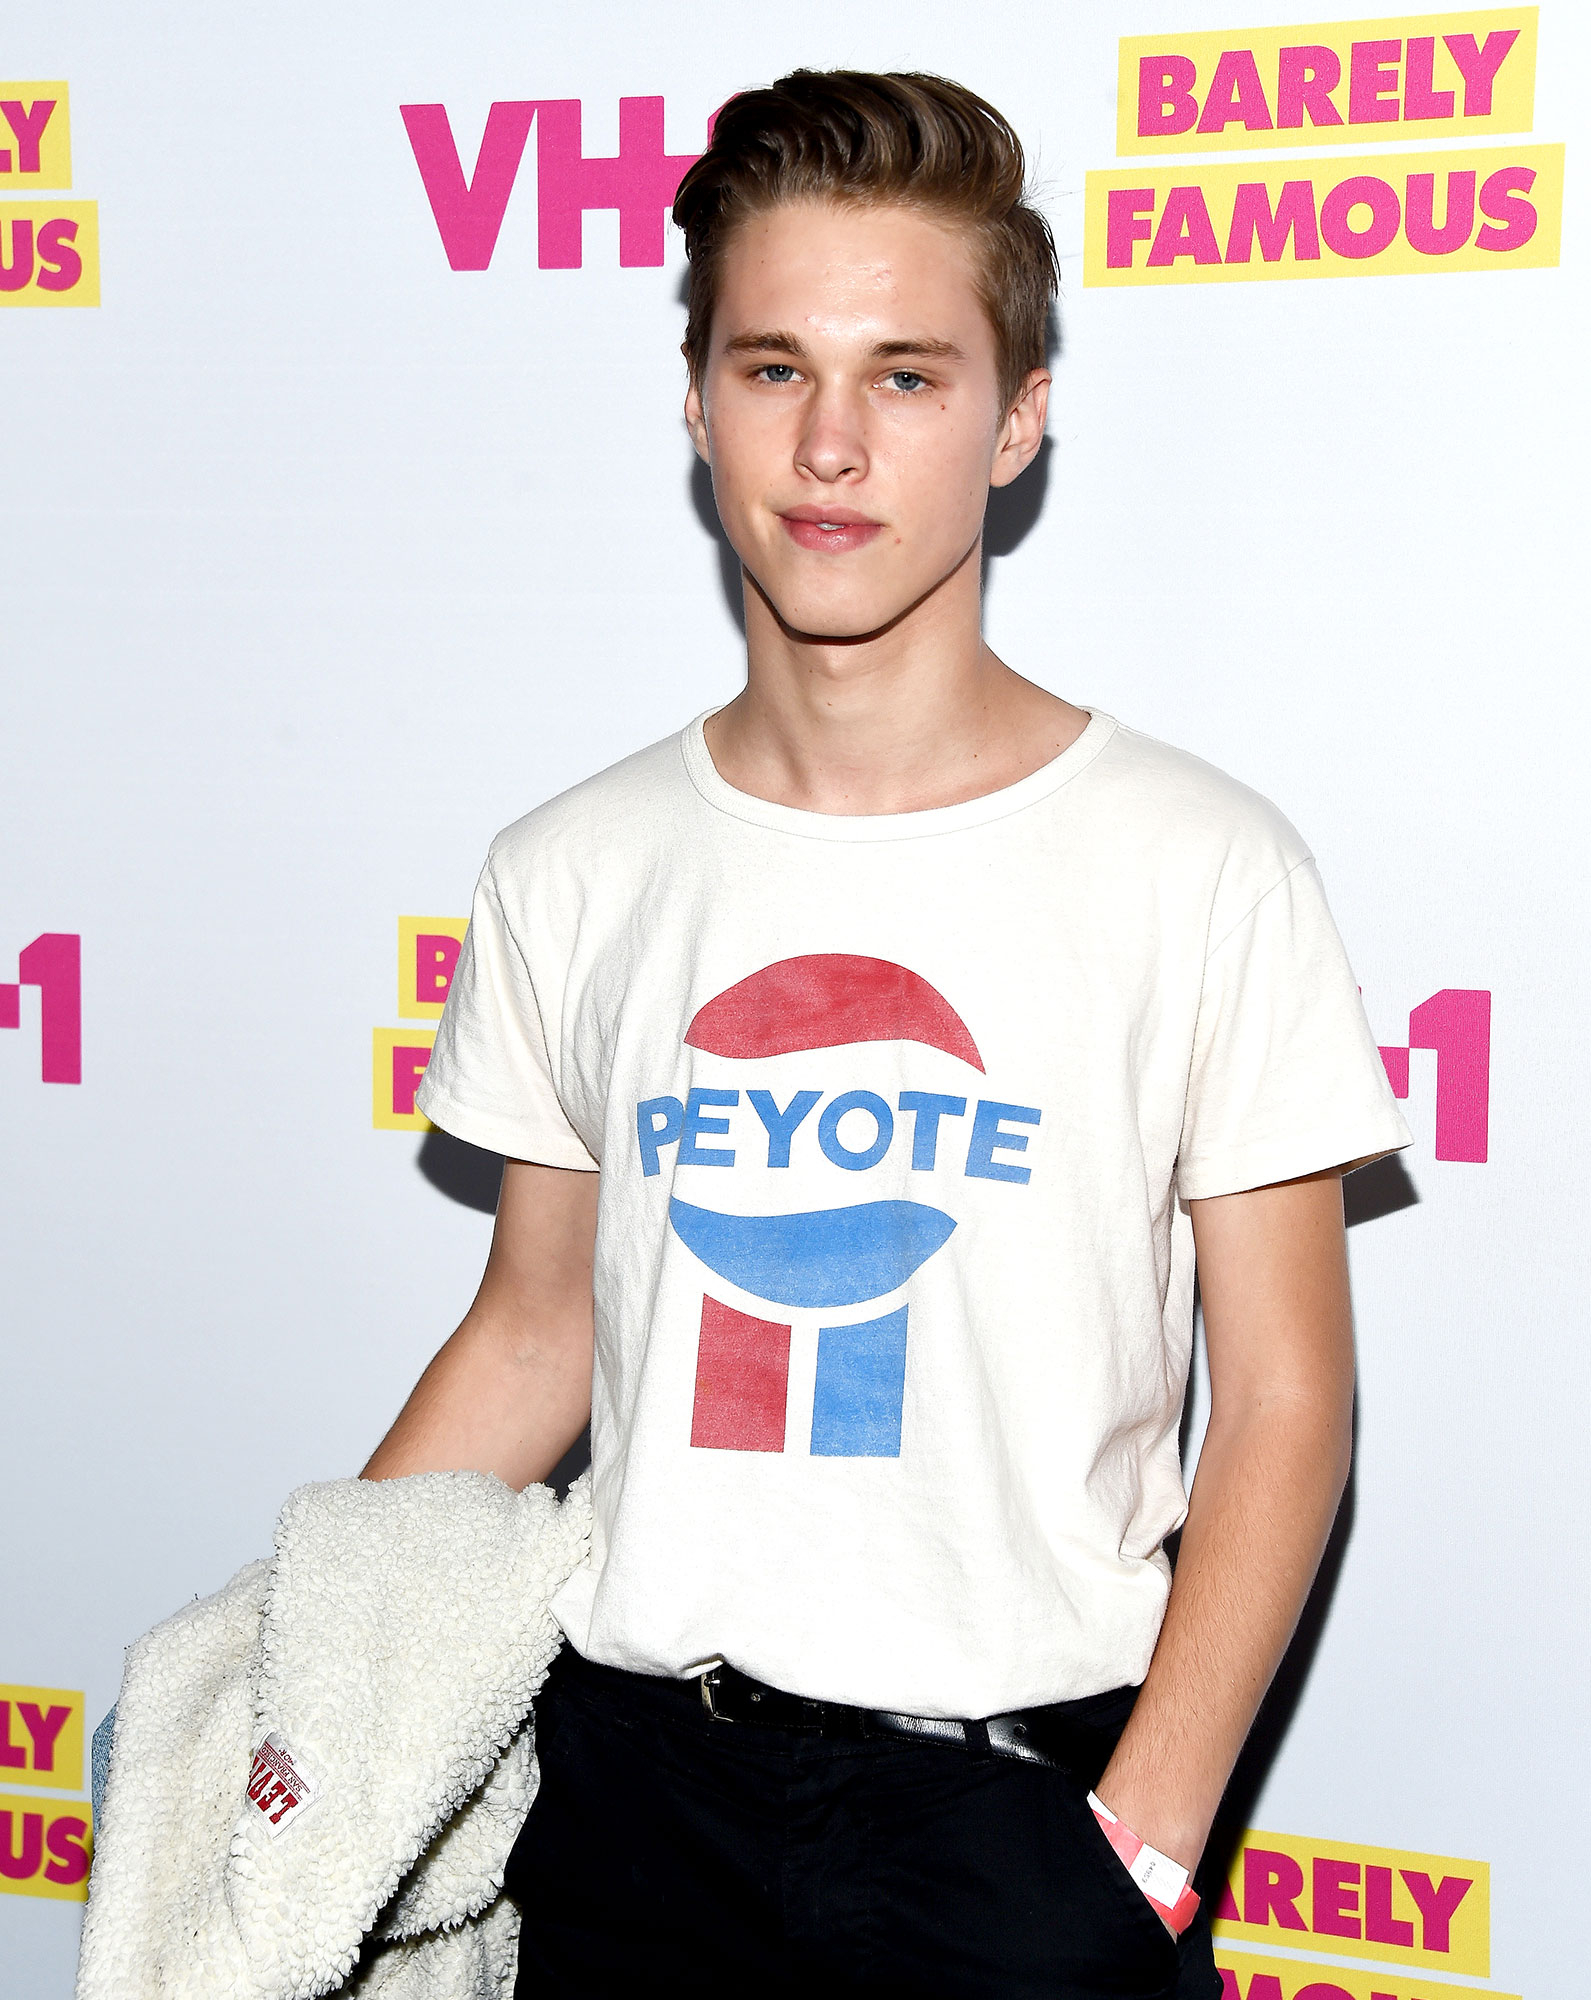 Singer Ryan Beatty Comes Out as Gay